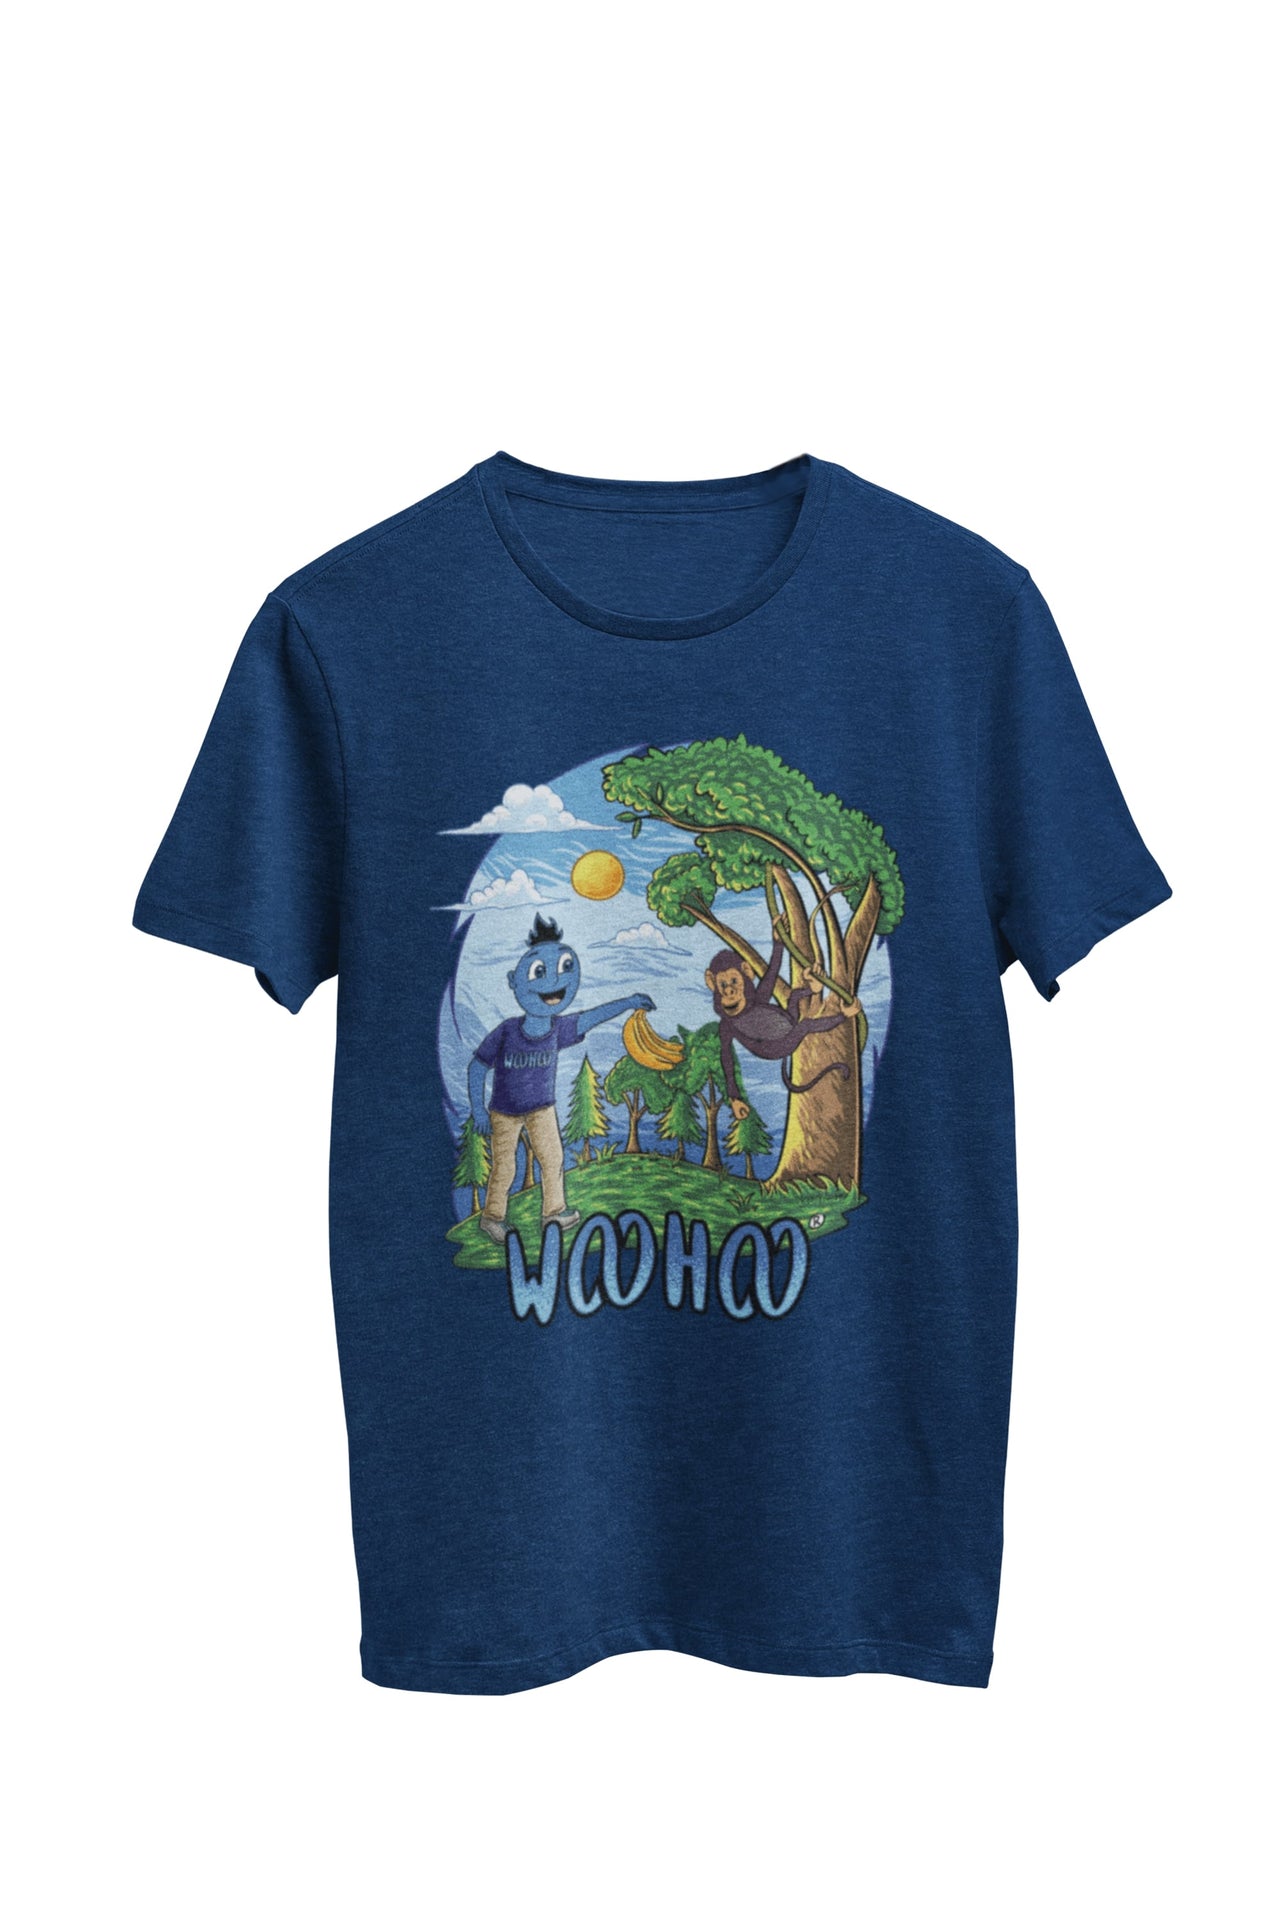 WooHooBerry, immersed in a jungle setting, merrily sharing bananas with a playful monkey perched in a tree. The navy T-shirt boasts an artistic 'WooHoo' text, perfectly blending with the adventurous and lighthearted ambiance of the scene.